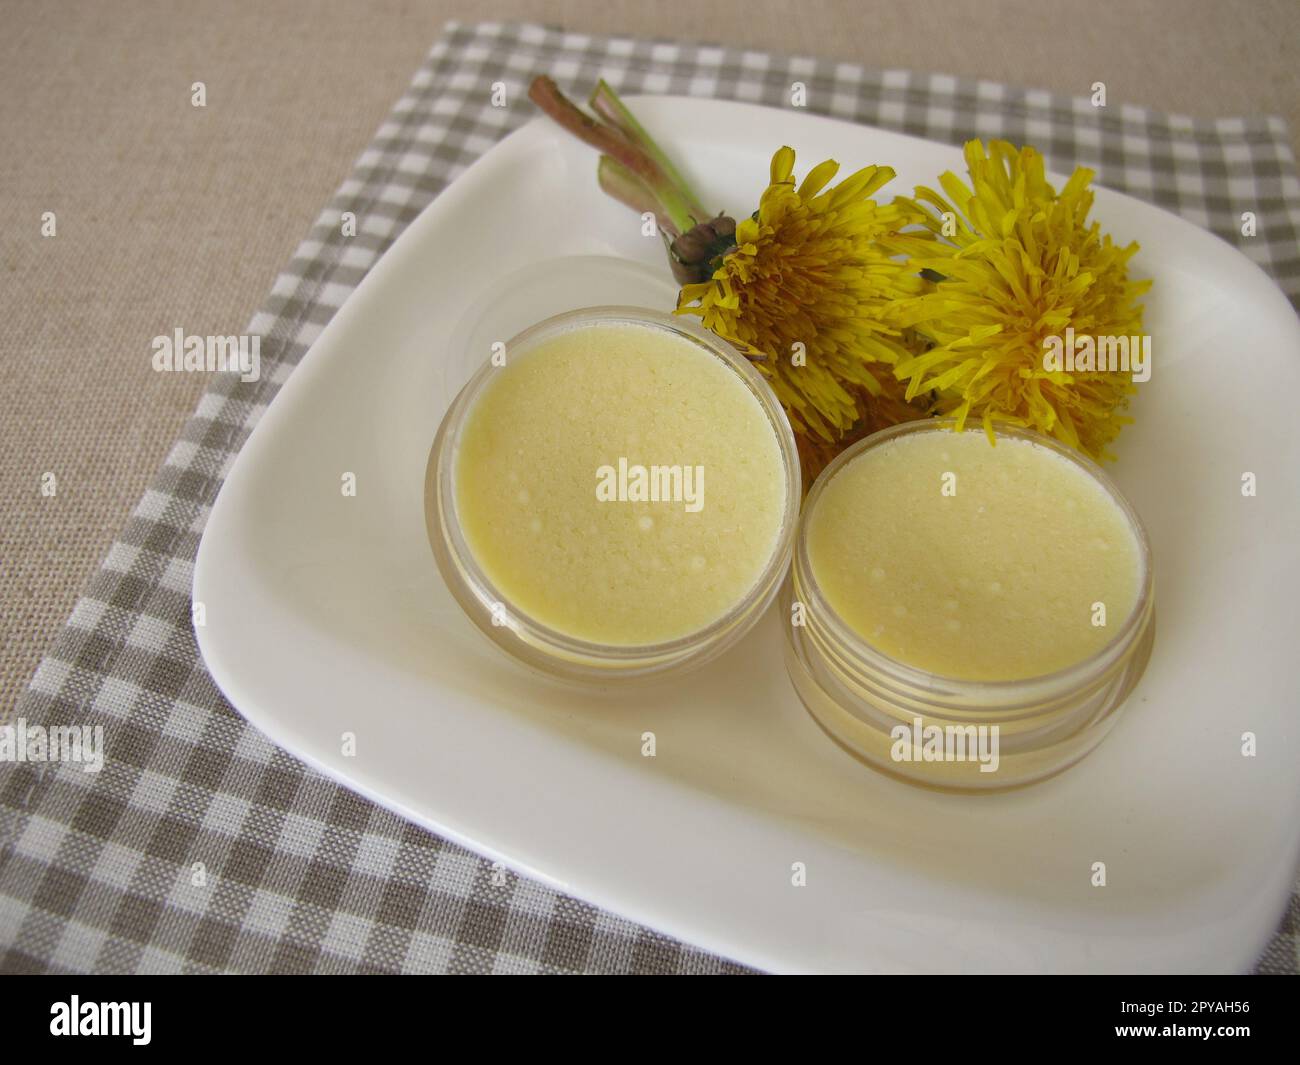 Homemade dandelion ointment, salve with an oil extract of dandelion flowers Stock Photo